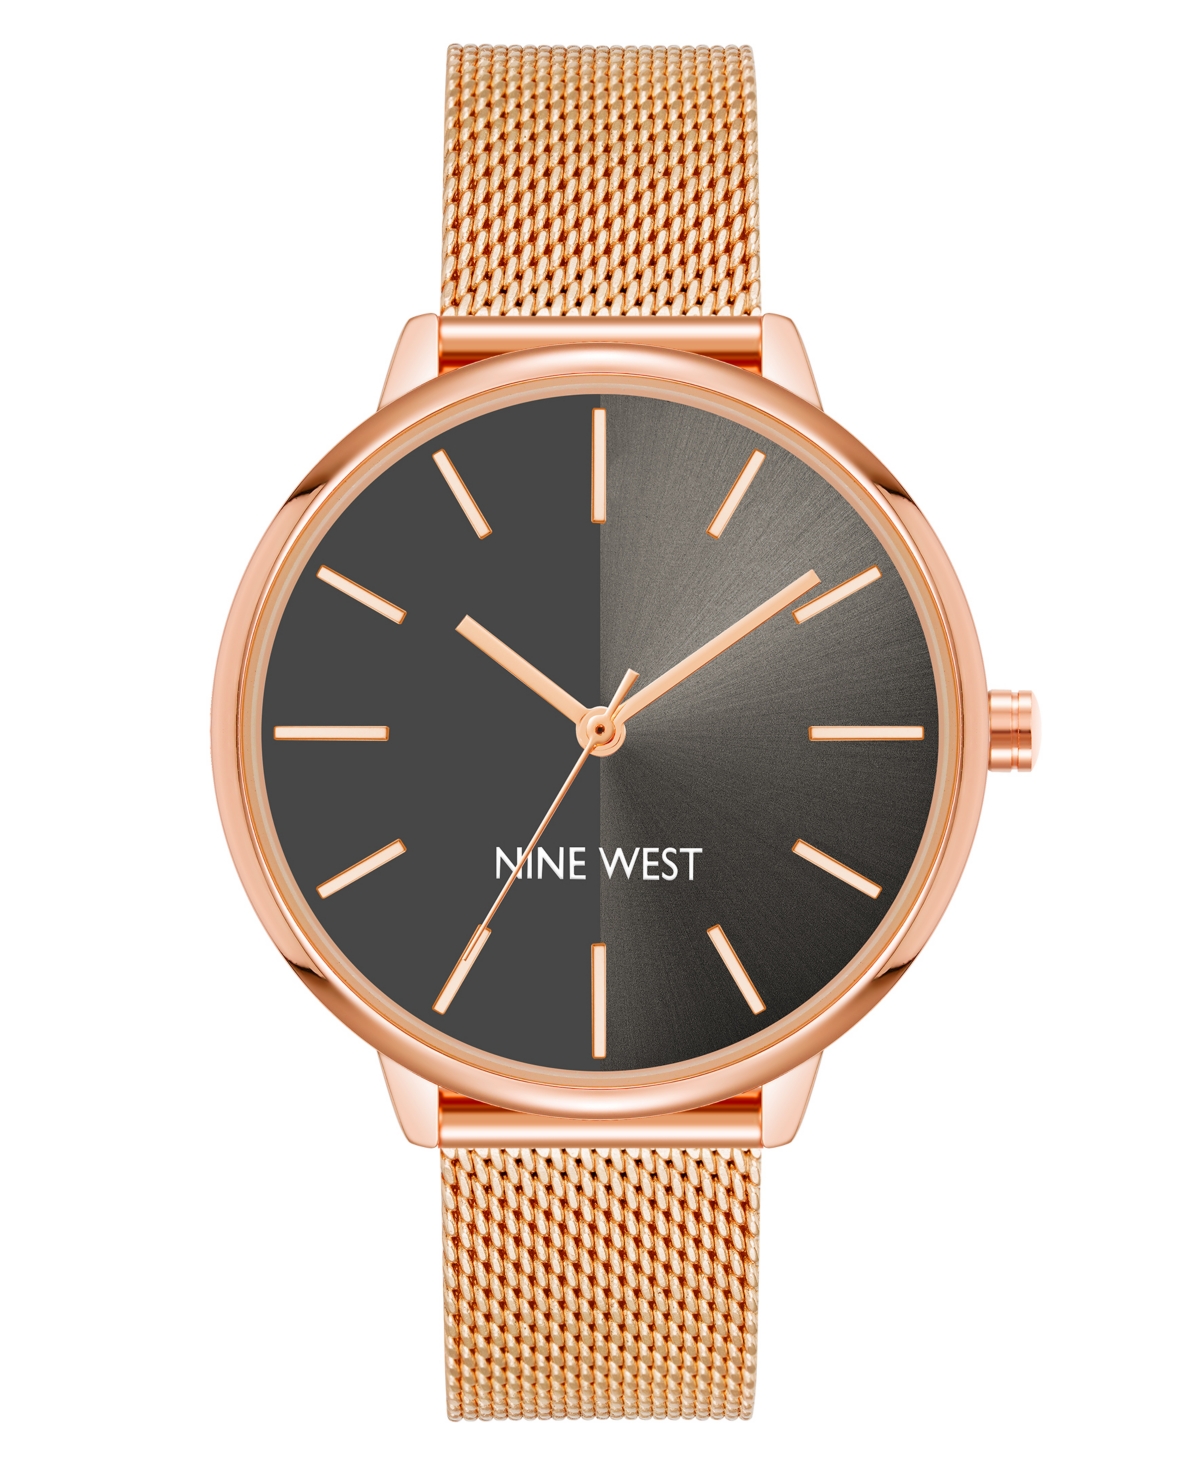 Nine West Women's Quartz Rose Gold-tone Stainless Steel Mesh Band Watch, 40mm In Gray,rose Gold-tone